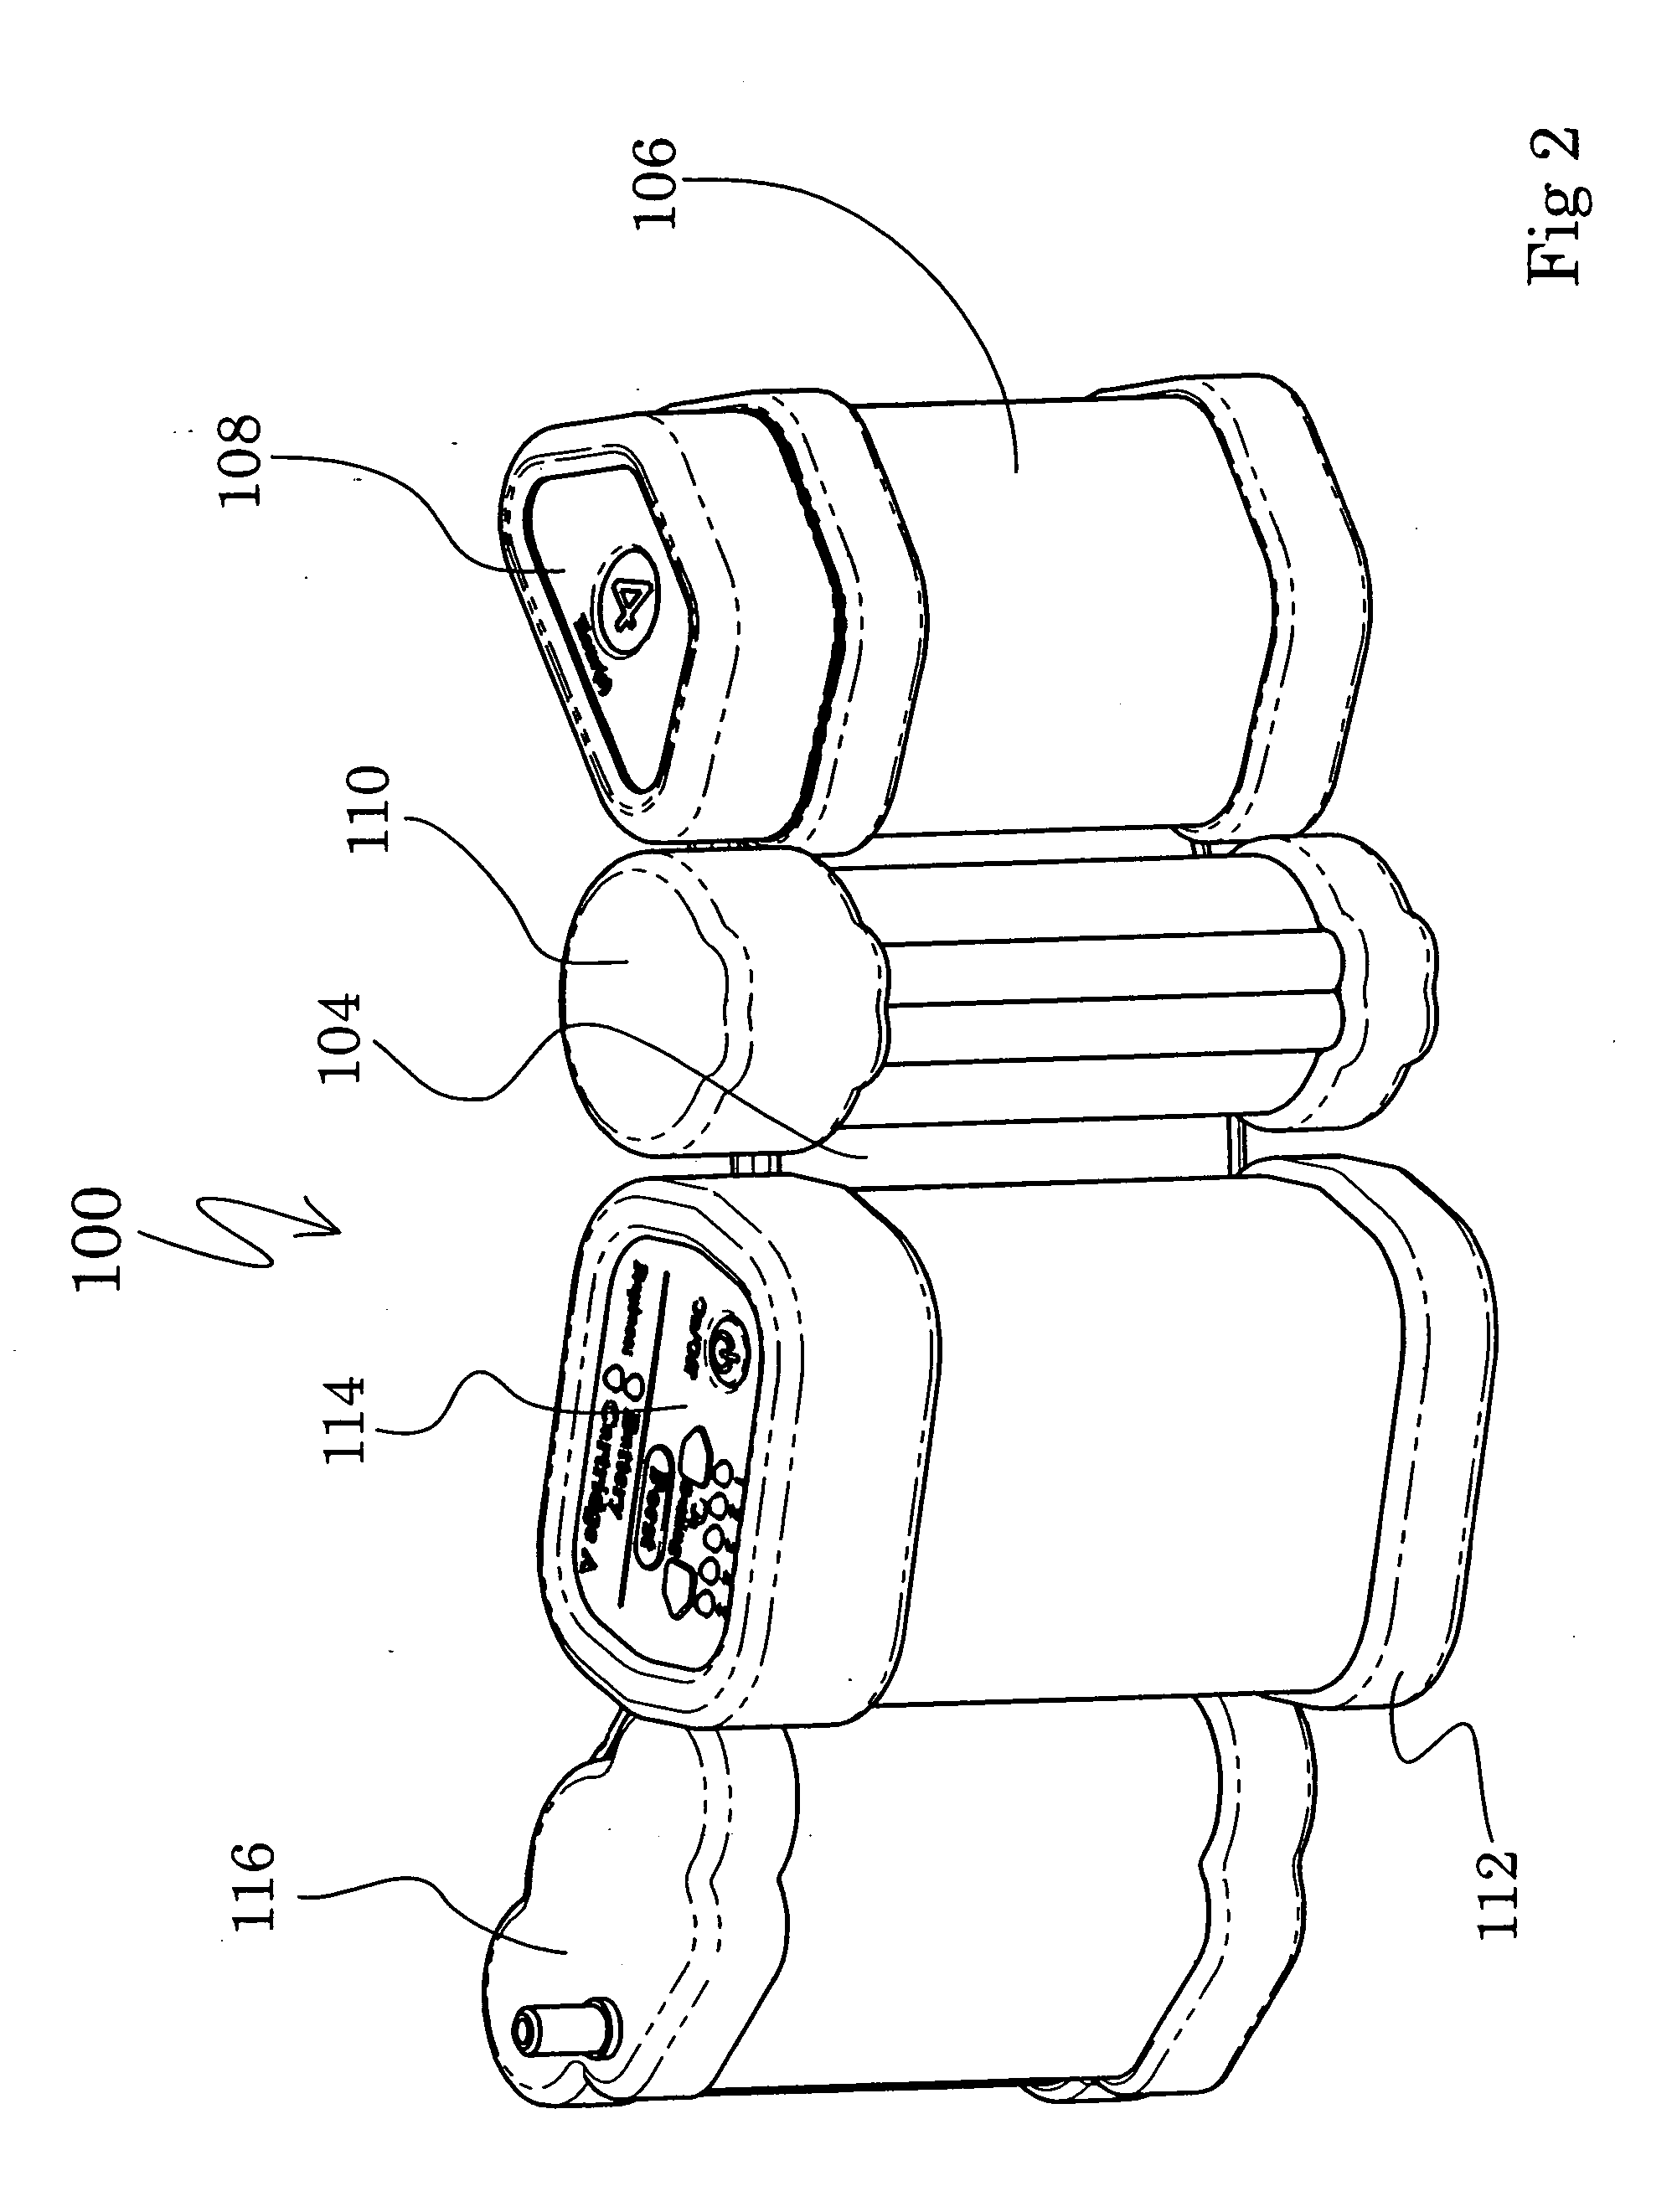 Ambulatory oxygen concentrator containing a three phase vacuum separation system